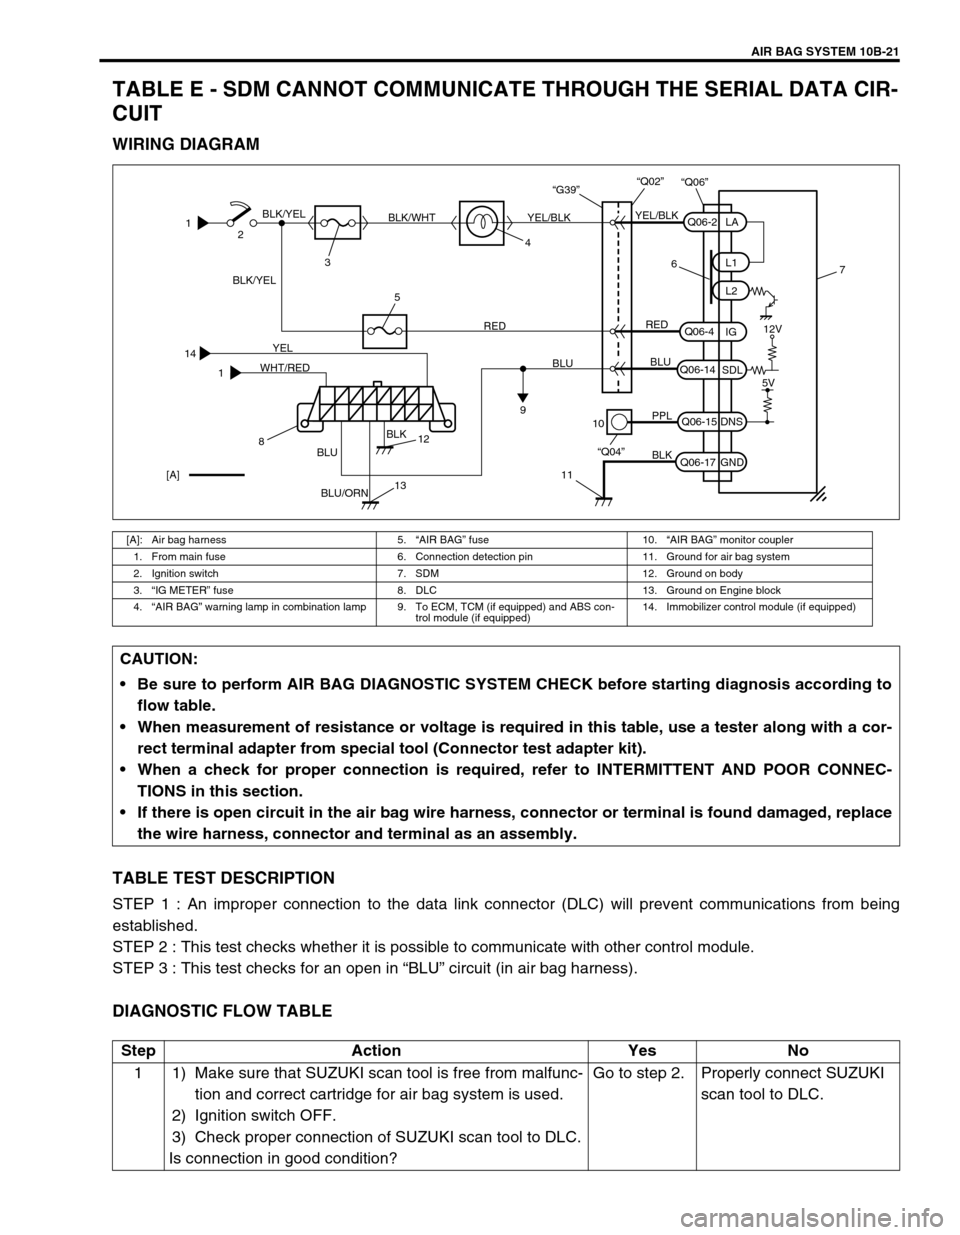 SUZUKI SWIFT 2000 1.G Transmission Service Repair Manual AIR BAG SYSTEM 10B-21
TABLE E - SDM CANNOT COMMUNICATE THROUGH THE SERIAL DATA CIR-
CUIT
WIRING DIAGRAM
TABLE TEST DESCRIPTION
STEP 1 : An improper connection to the data link connector (DLC) will pre